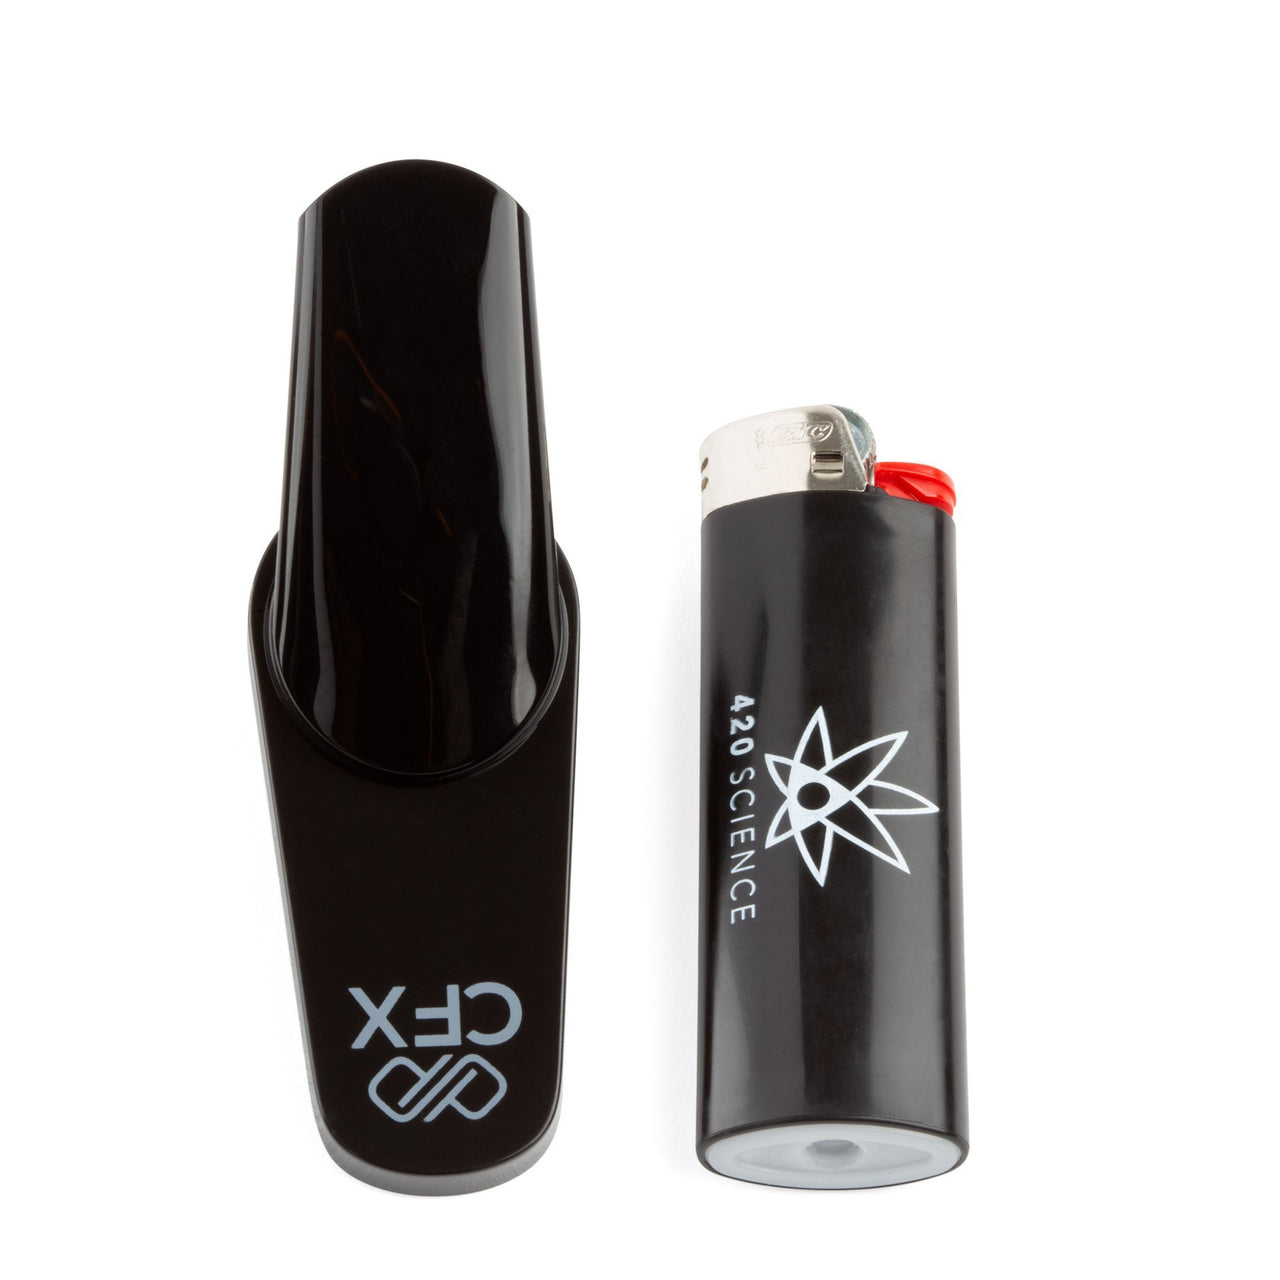 Boundless CFX Replacement Mouthpiece - 420 Science - The most trusted online smoke shop.